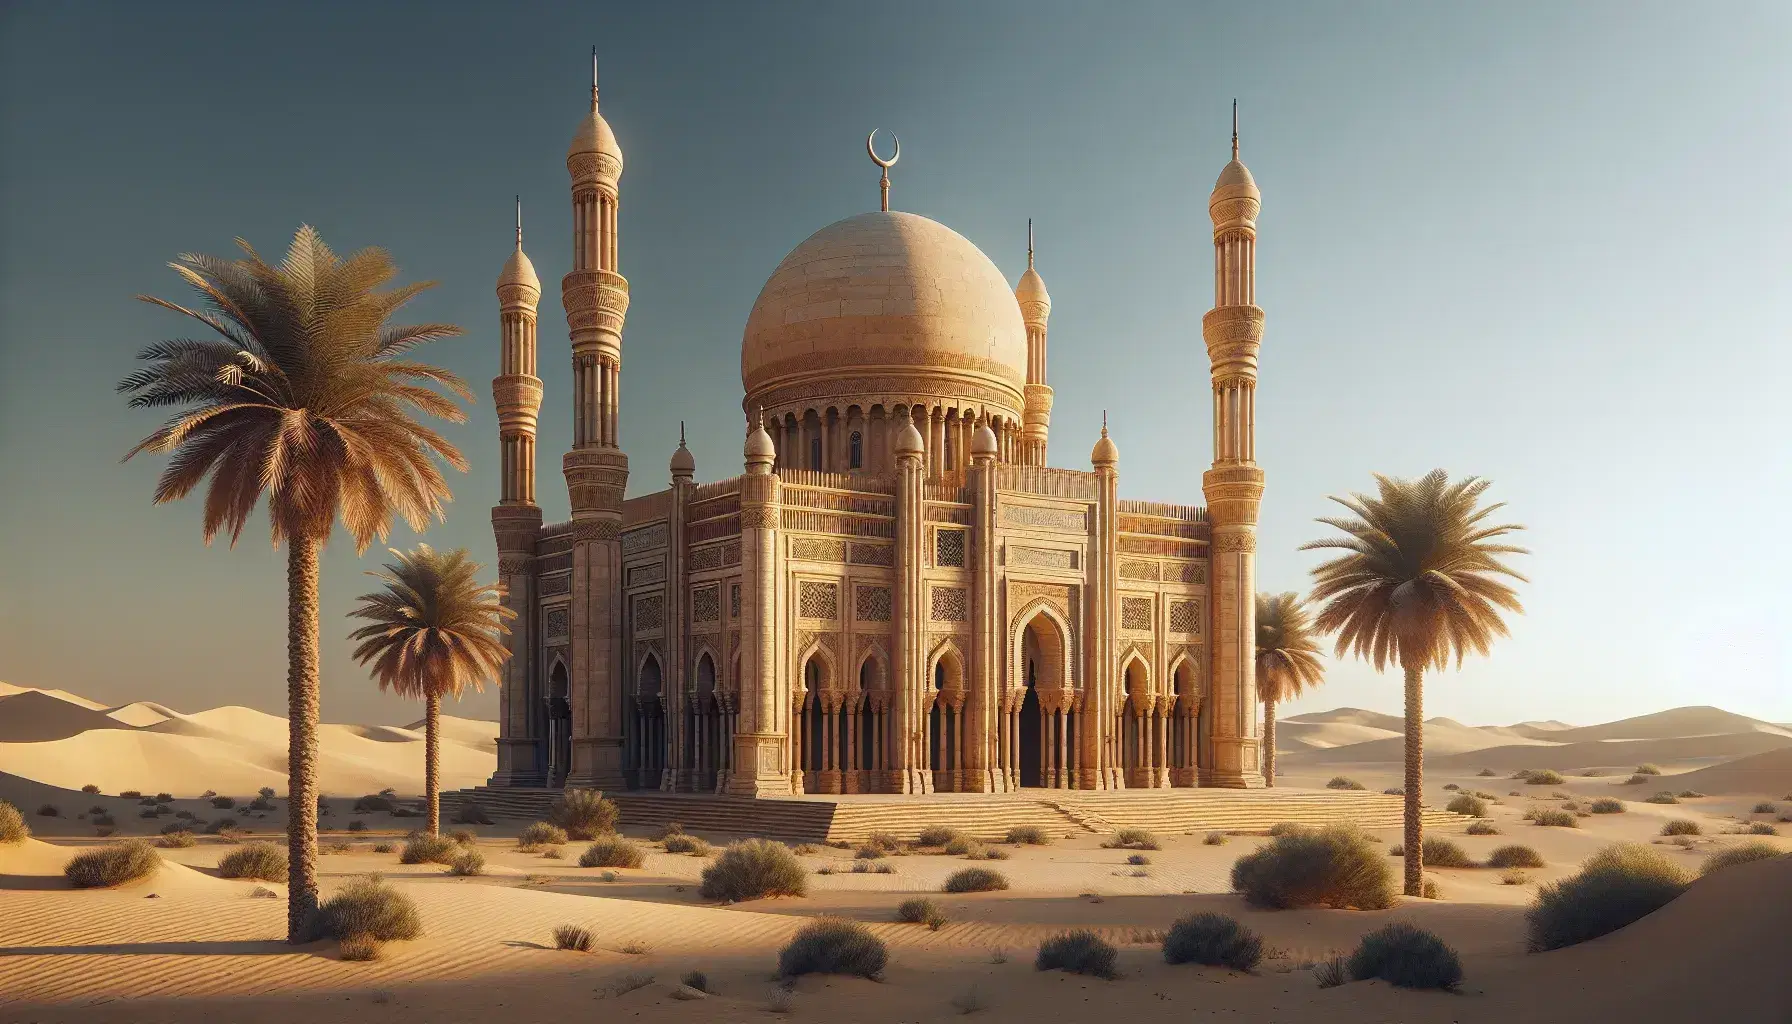 Ancient golden-hued mosque with central dome, crescent finial, and four minarets amid desert palms under a clear blue sky.